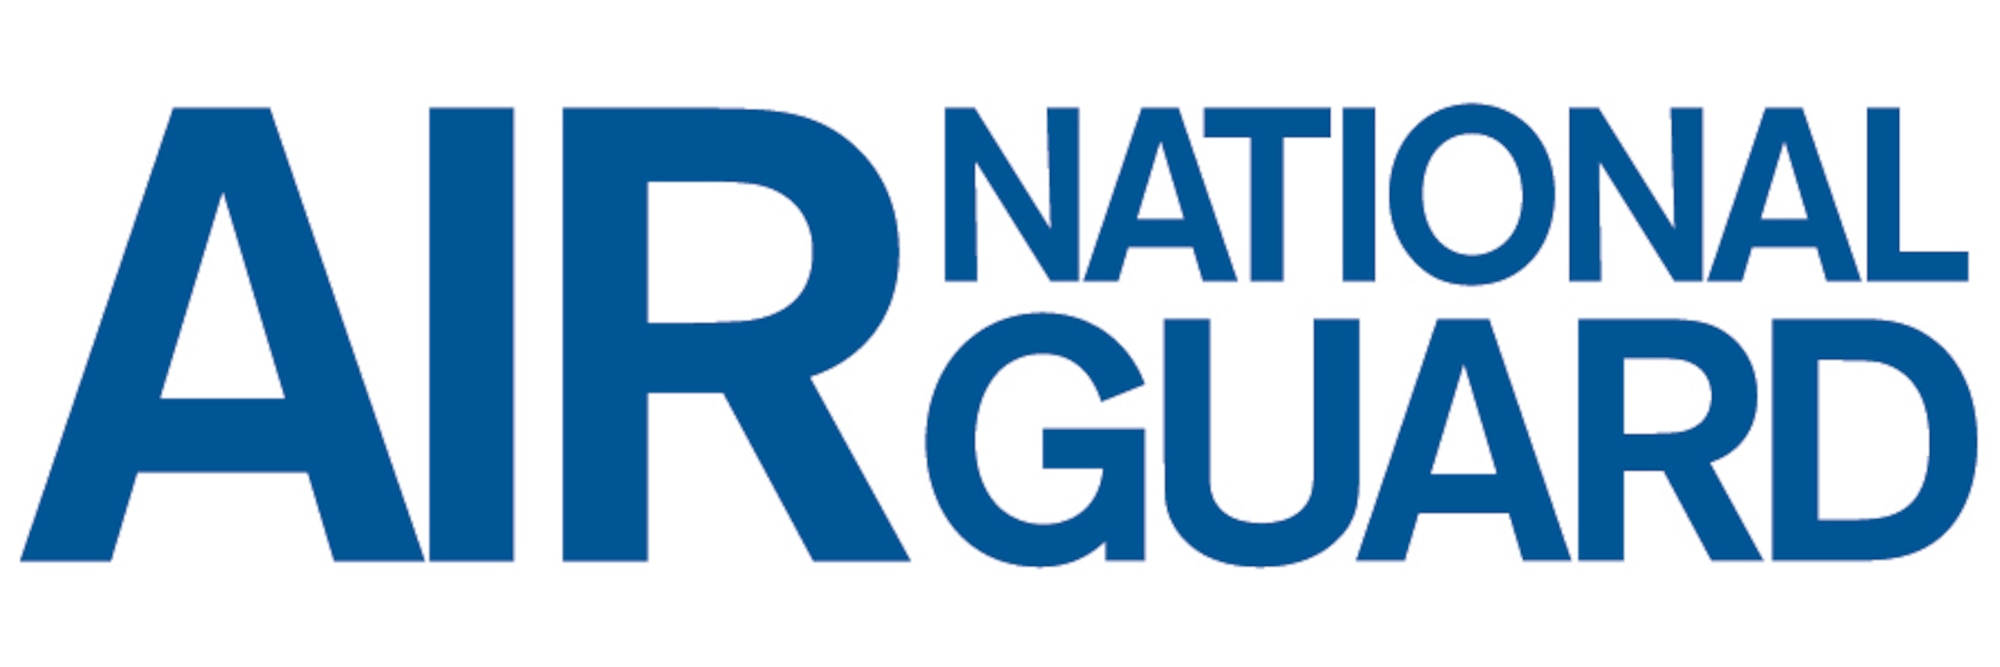 This is the wordmark for the Air National Guard. It is available in EPS, JPG, TIF, and PDF file formats (custom weight, altered letterforms), and should NEVER be typeset, except in the flow of body copy. 

ALWAYS use the approved graphics provided. Excluding proportional enlargement and reduction, this graphic may not be altered in any way. See notes on approved color, state usage, and alternate lockups in the following pages.
